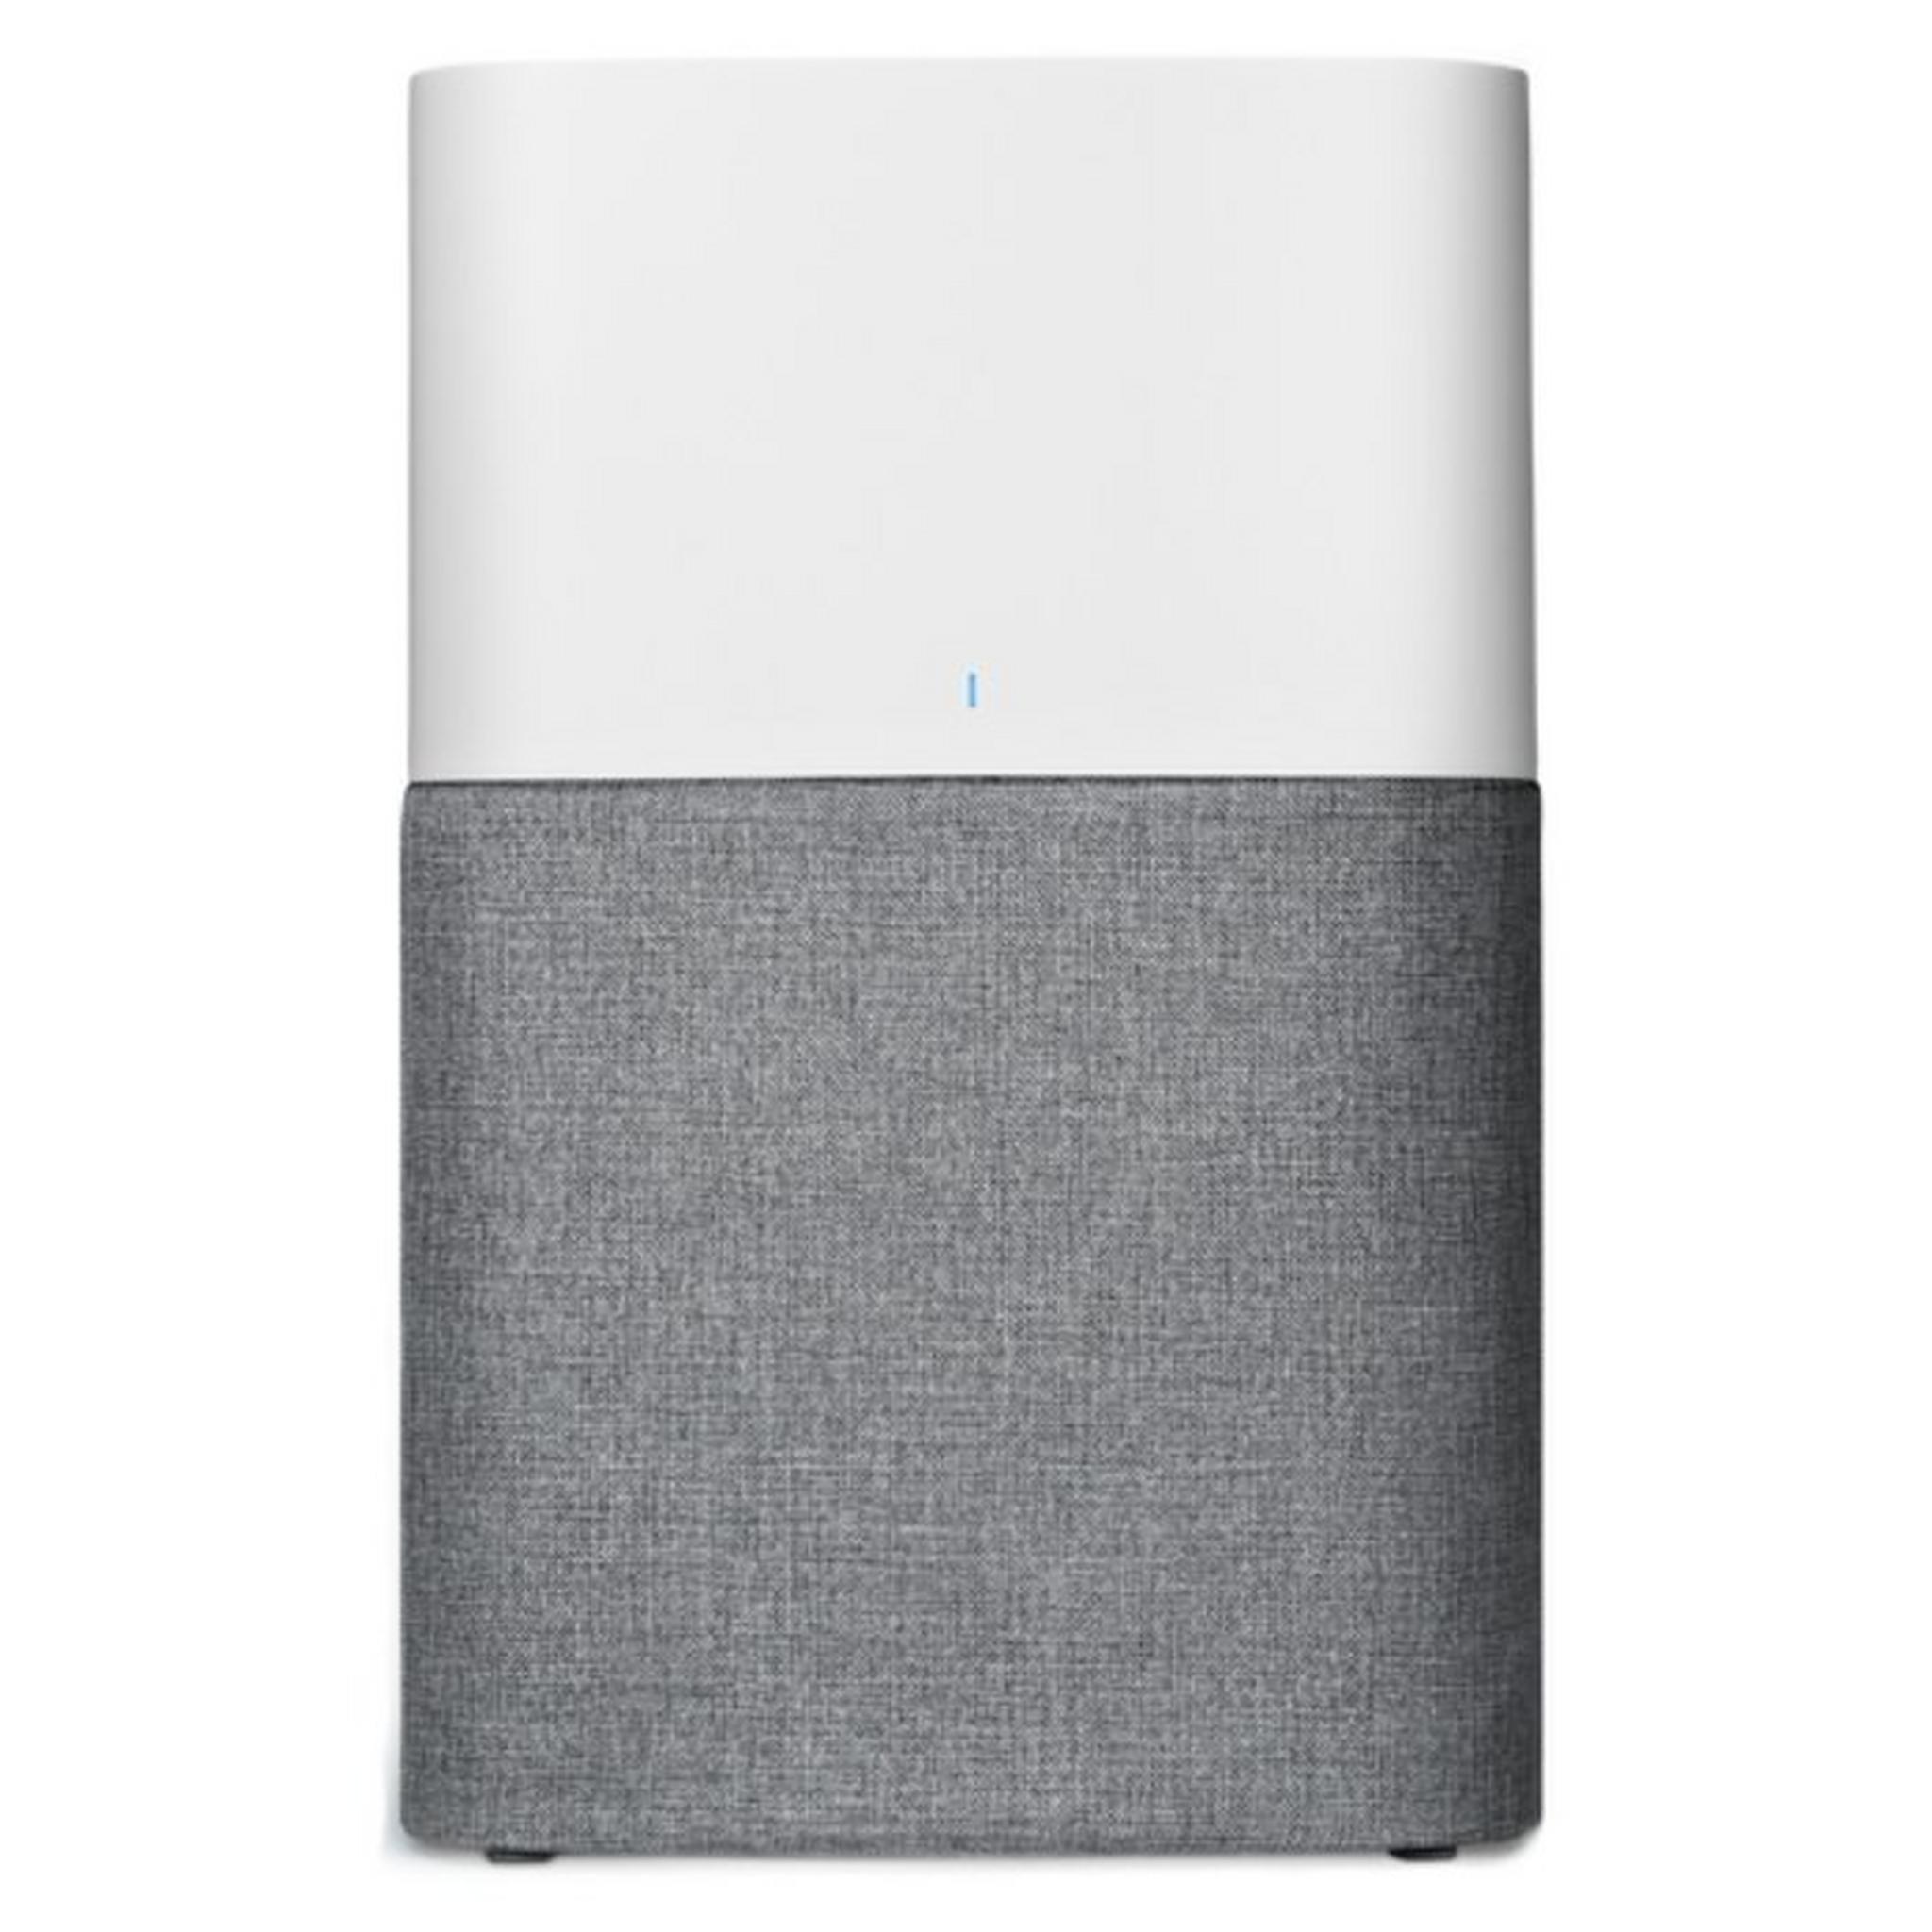 Blueair 3610 Air Purifier Combination Particle + Carbon filter, 106242 - White/Grey